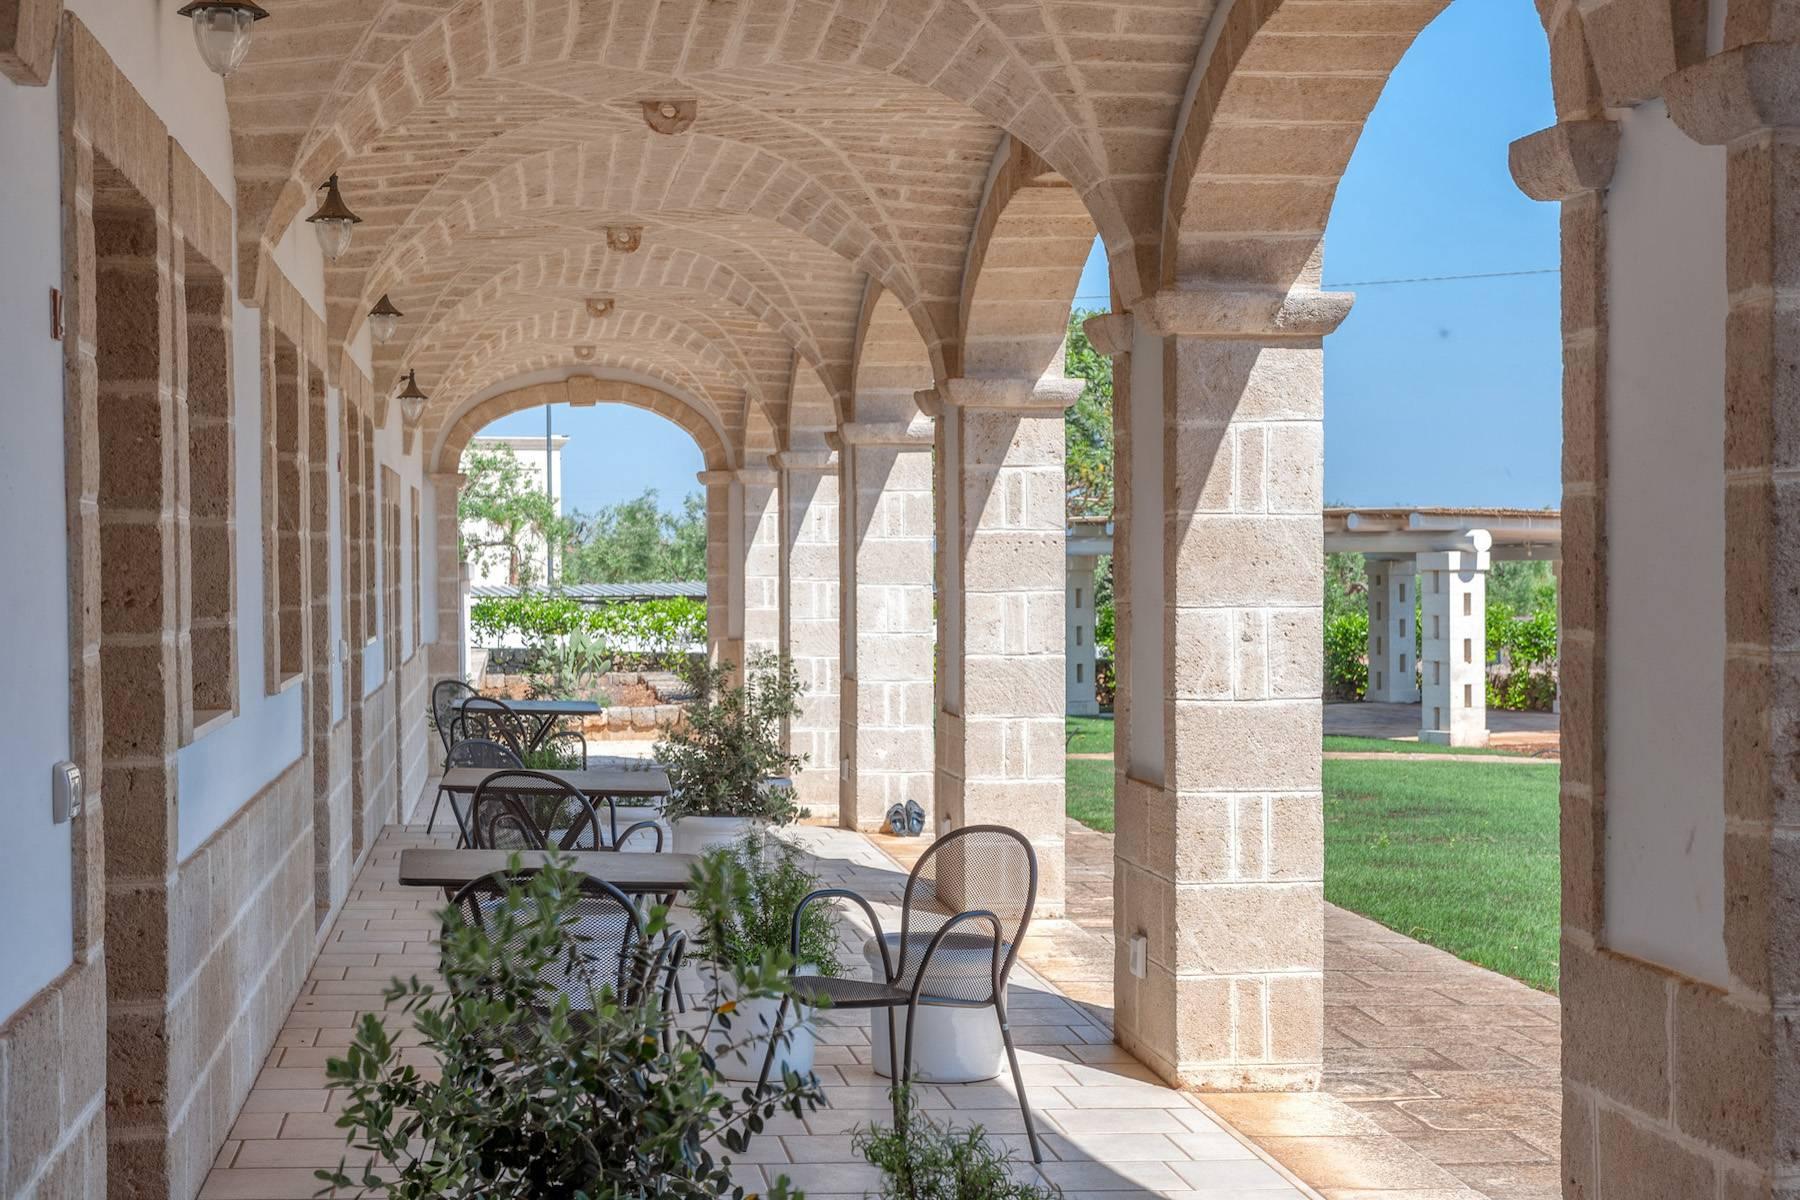 Charming 18th century Masseria surrounded by centuries-old olive trees - 27